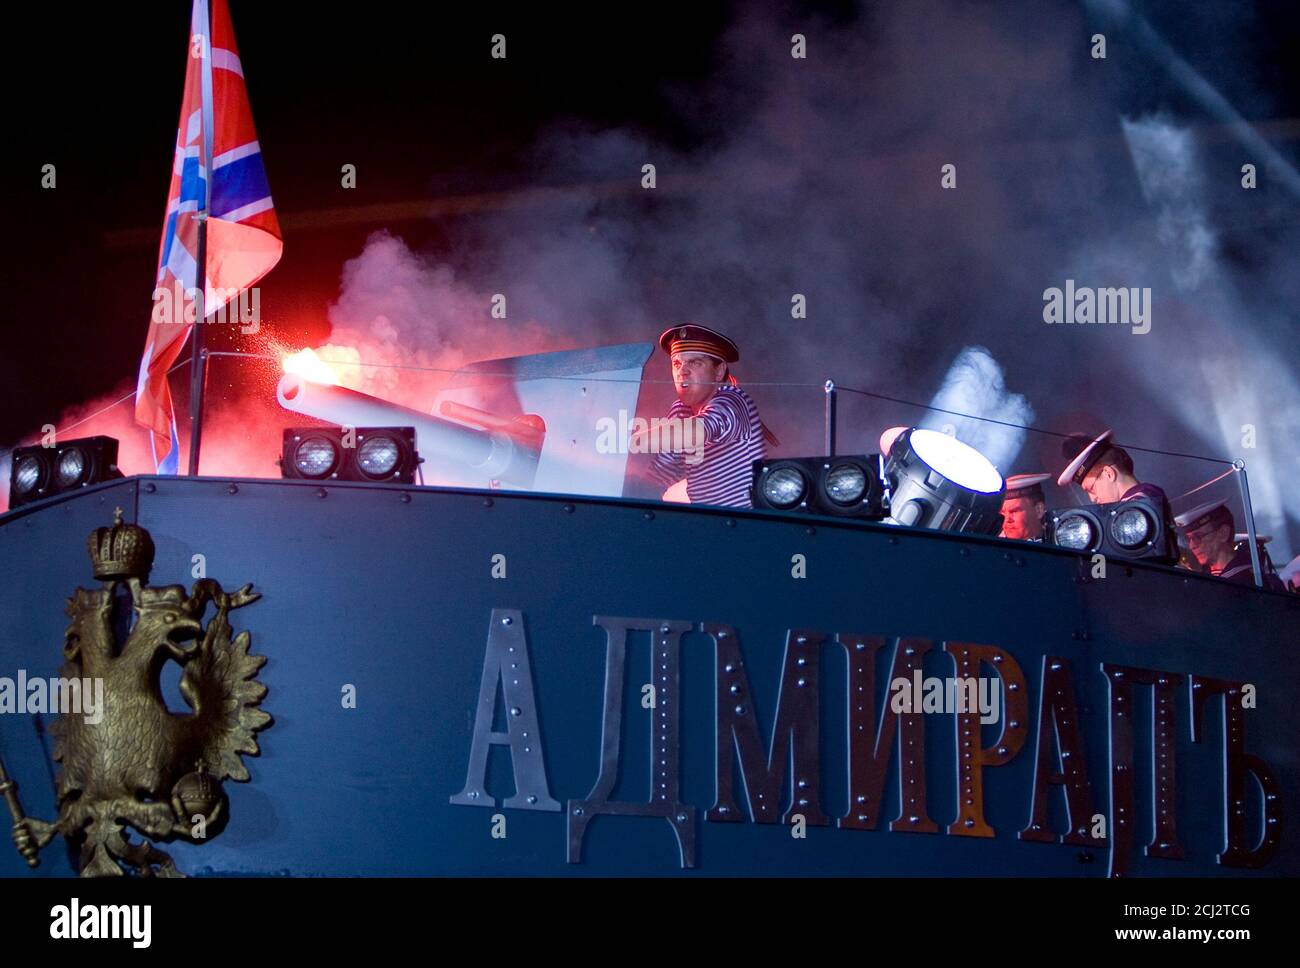 Sailors perform a mock sea battle on a fake war vessel in front of a Moscow cinema to promote Russia's latest blockbuster, October 6, 2008. The movie 'Admiral' hopes to woo big foreign audiences with an epic tale of doomed love set amid the chaos of the Russian Civil War; its politics conveniently chime with a Kremlin-sponsored mood of patriotism.  REUTERS/Thomas Peter  (RUSSIA) Stock Photo